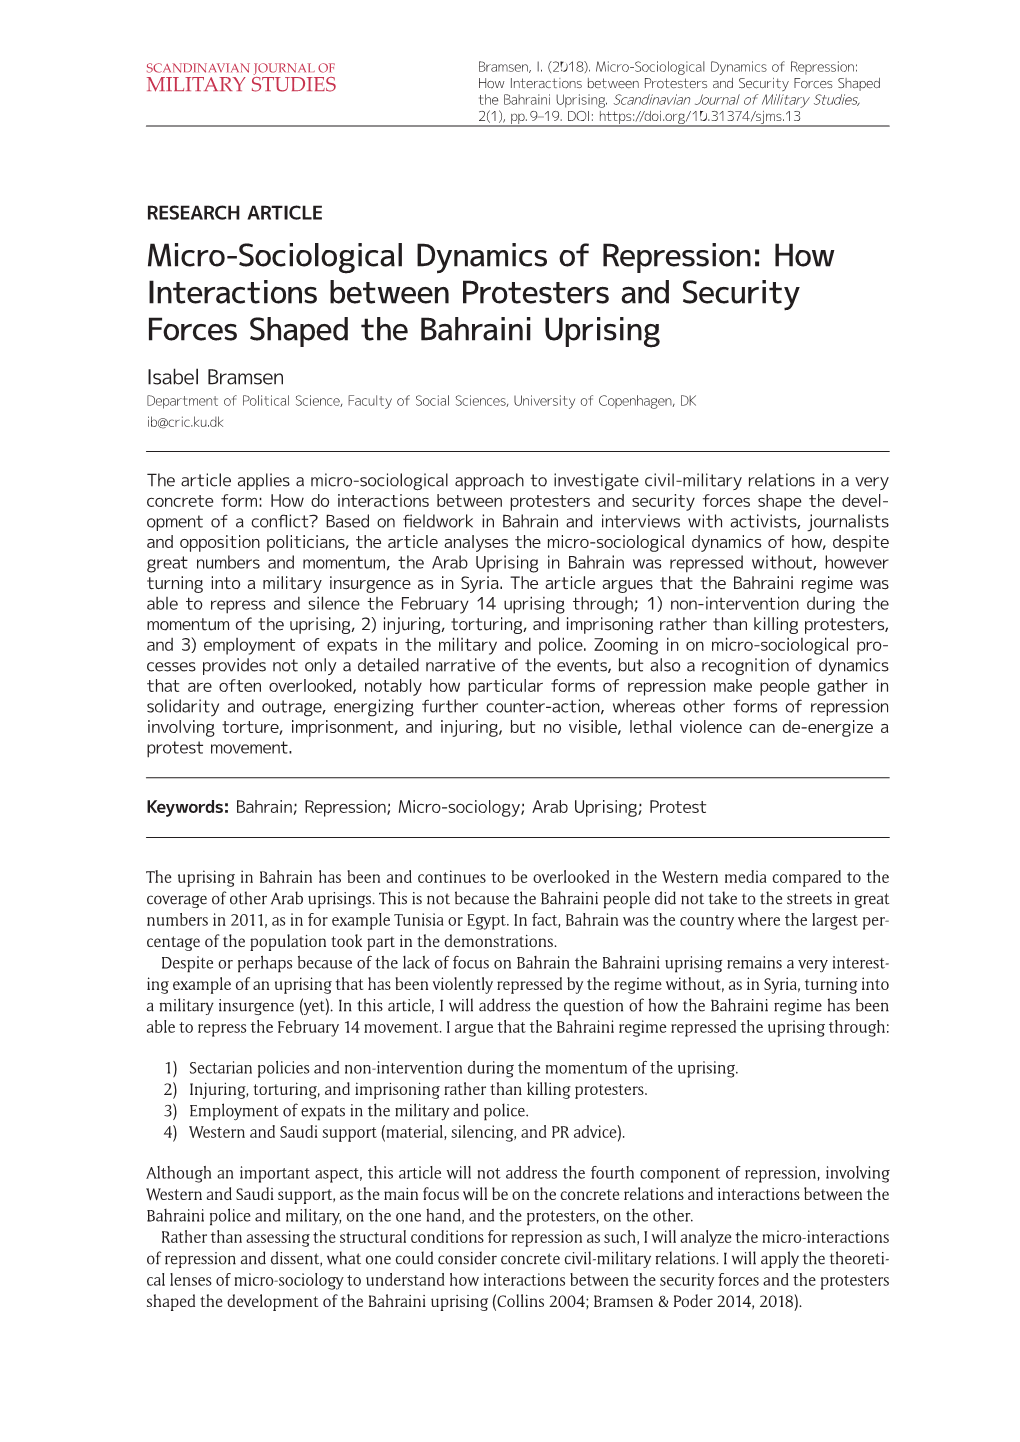 Micro-Sociological Dynamics of Repression: MILITARY STUDIES How Interactions Between Protesters and Security Forces Shaped the Bahraini Uprising